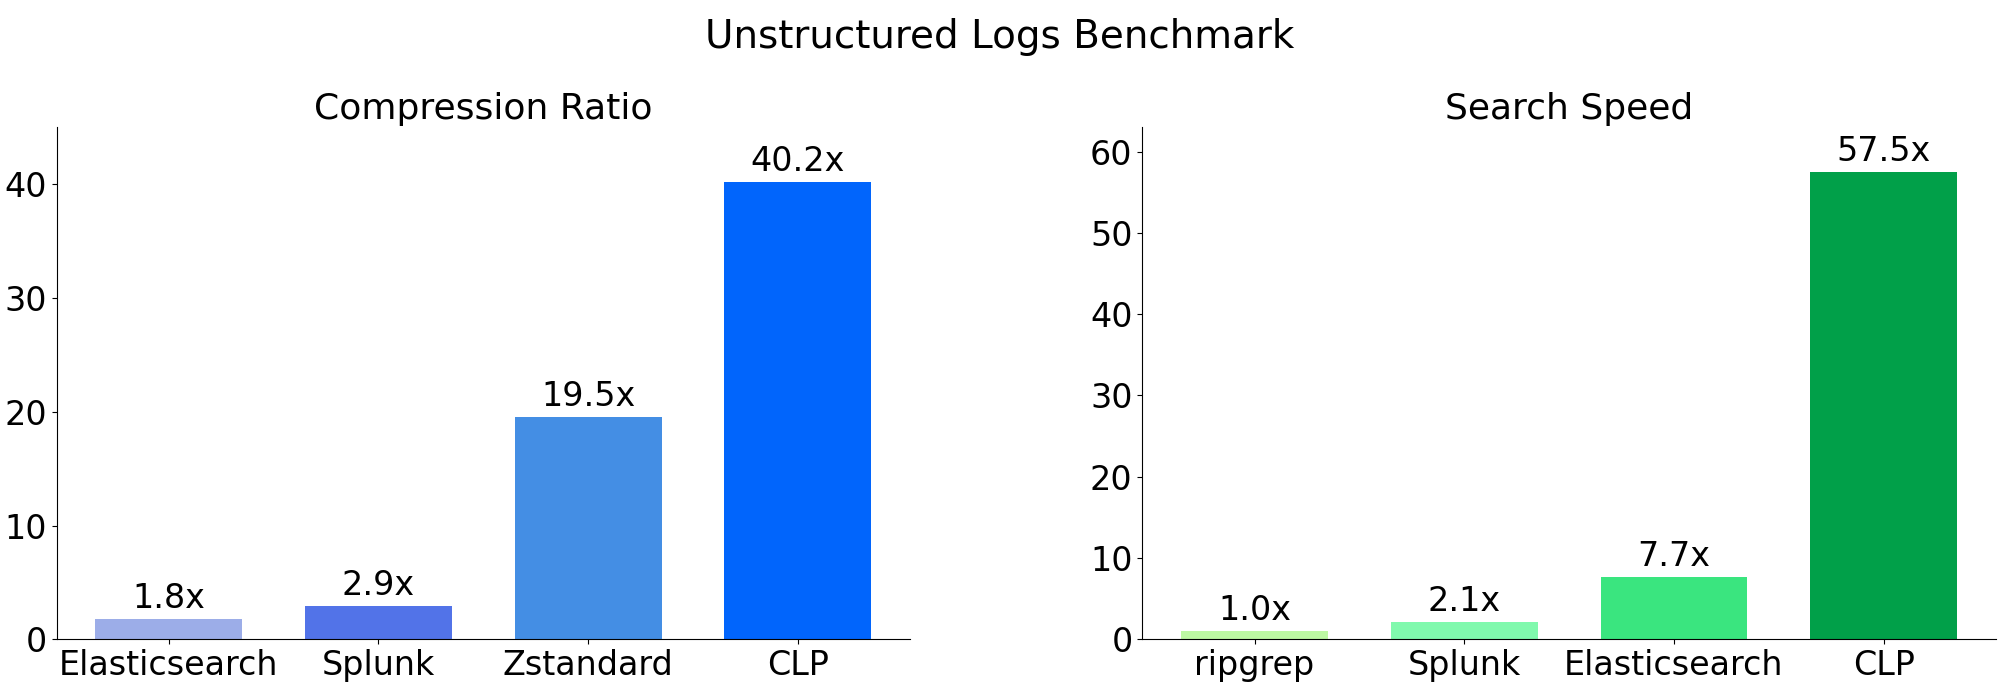 clp-unstructured-benchmark.png